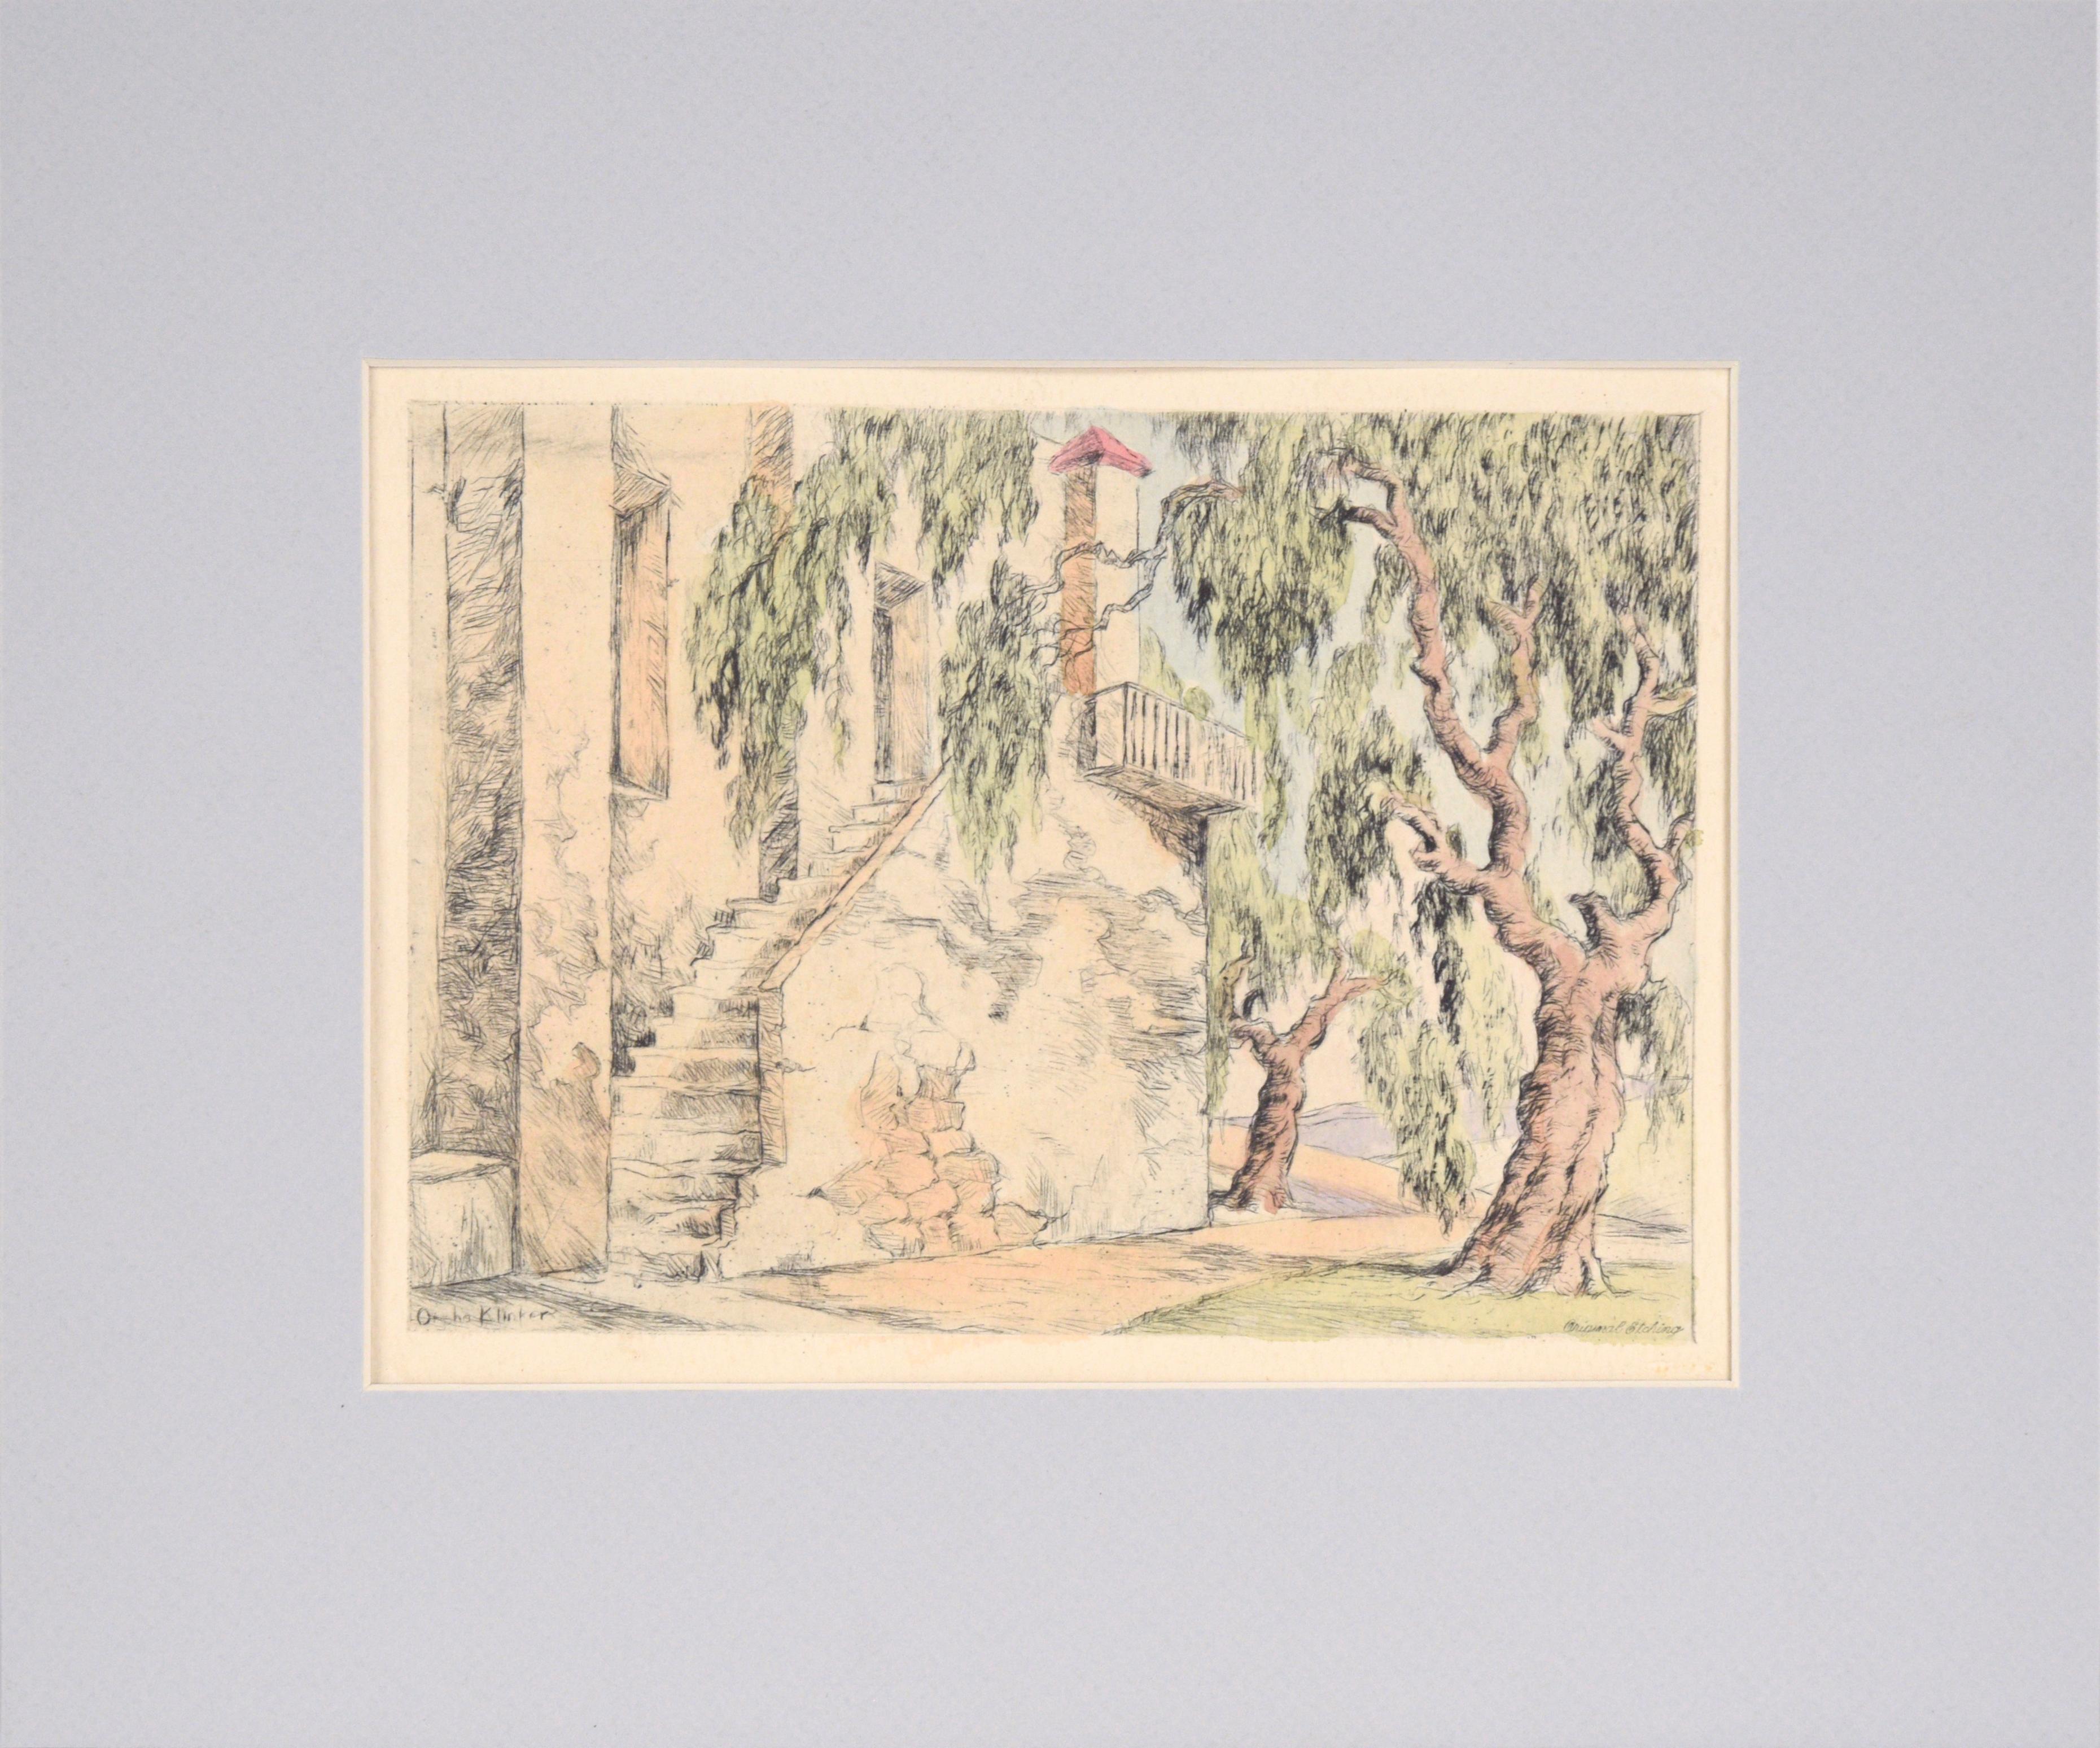 Corkscrew Willows with Stairs - Hand Colored Drypoint Etching California Adobe